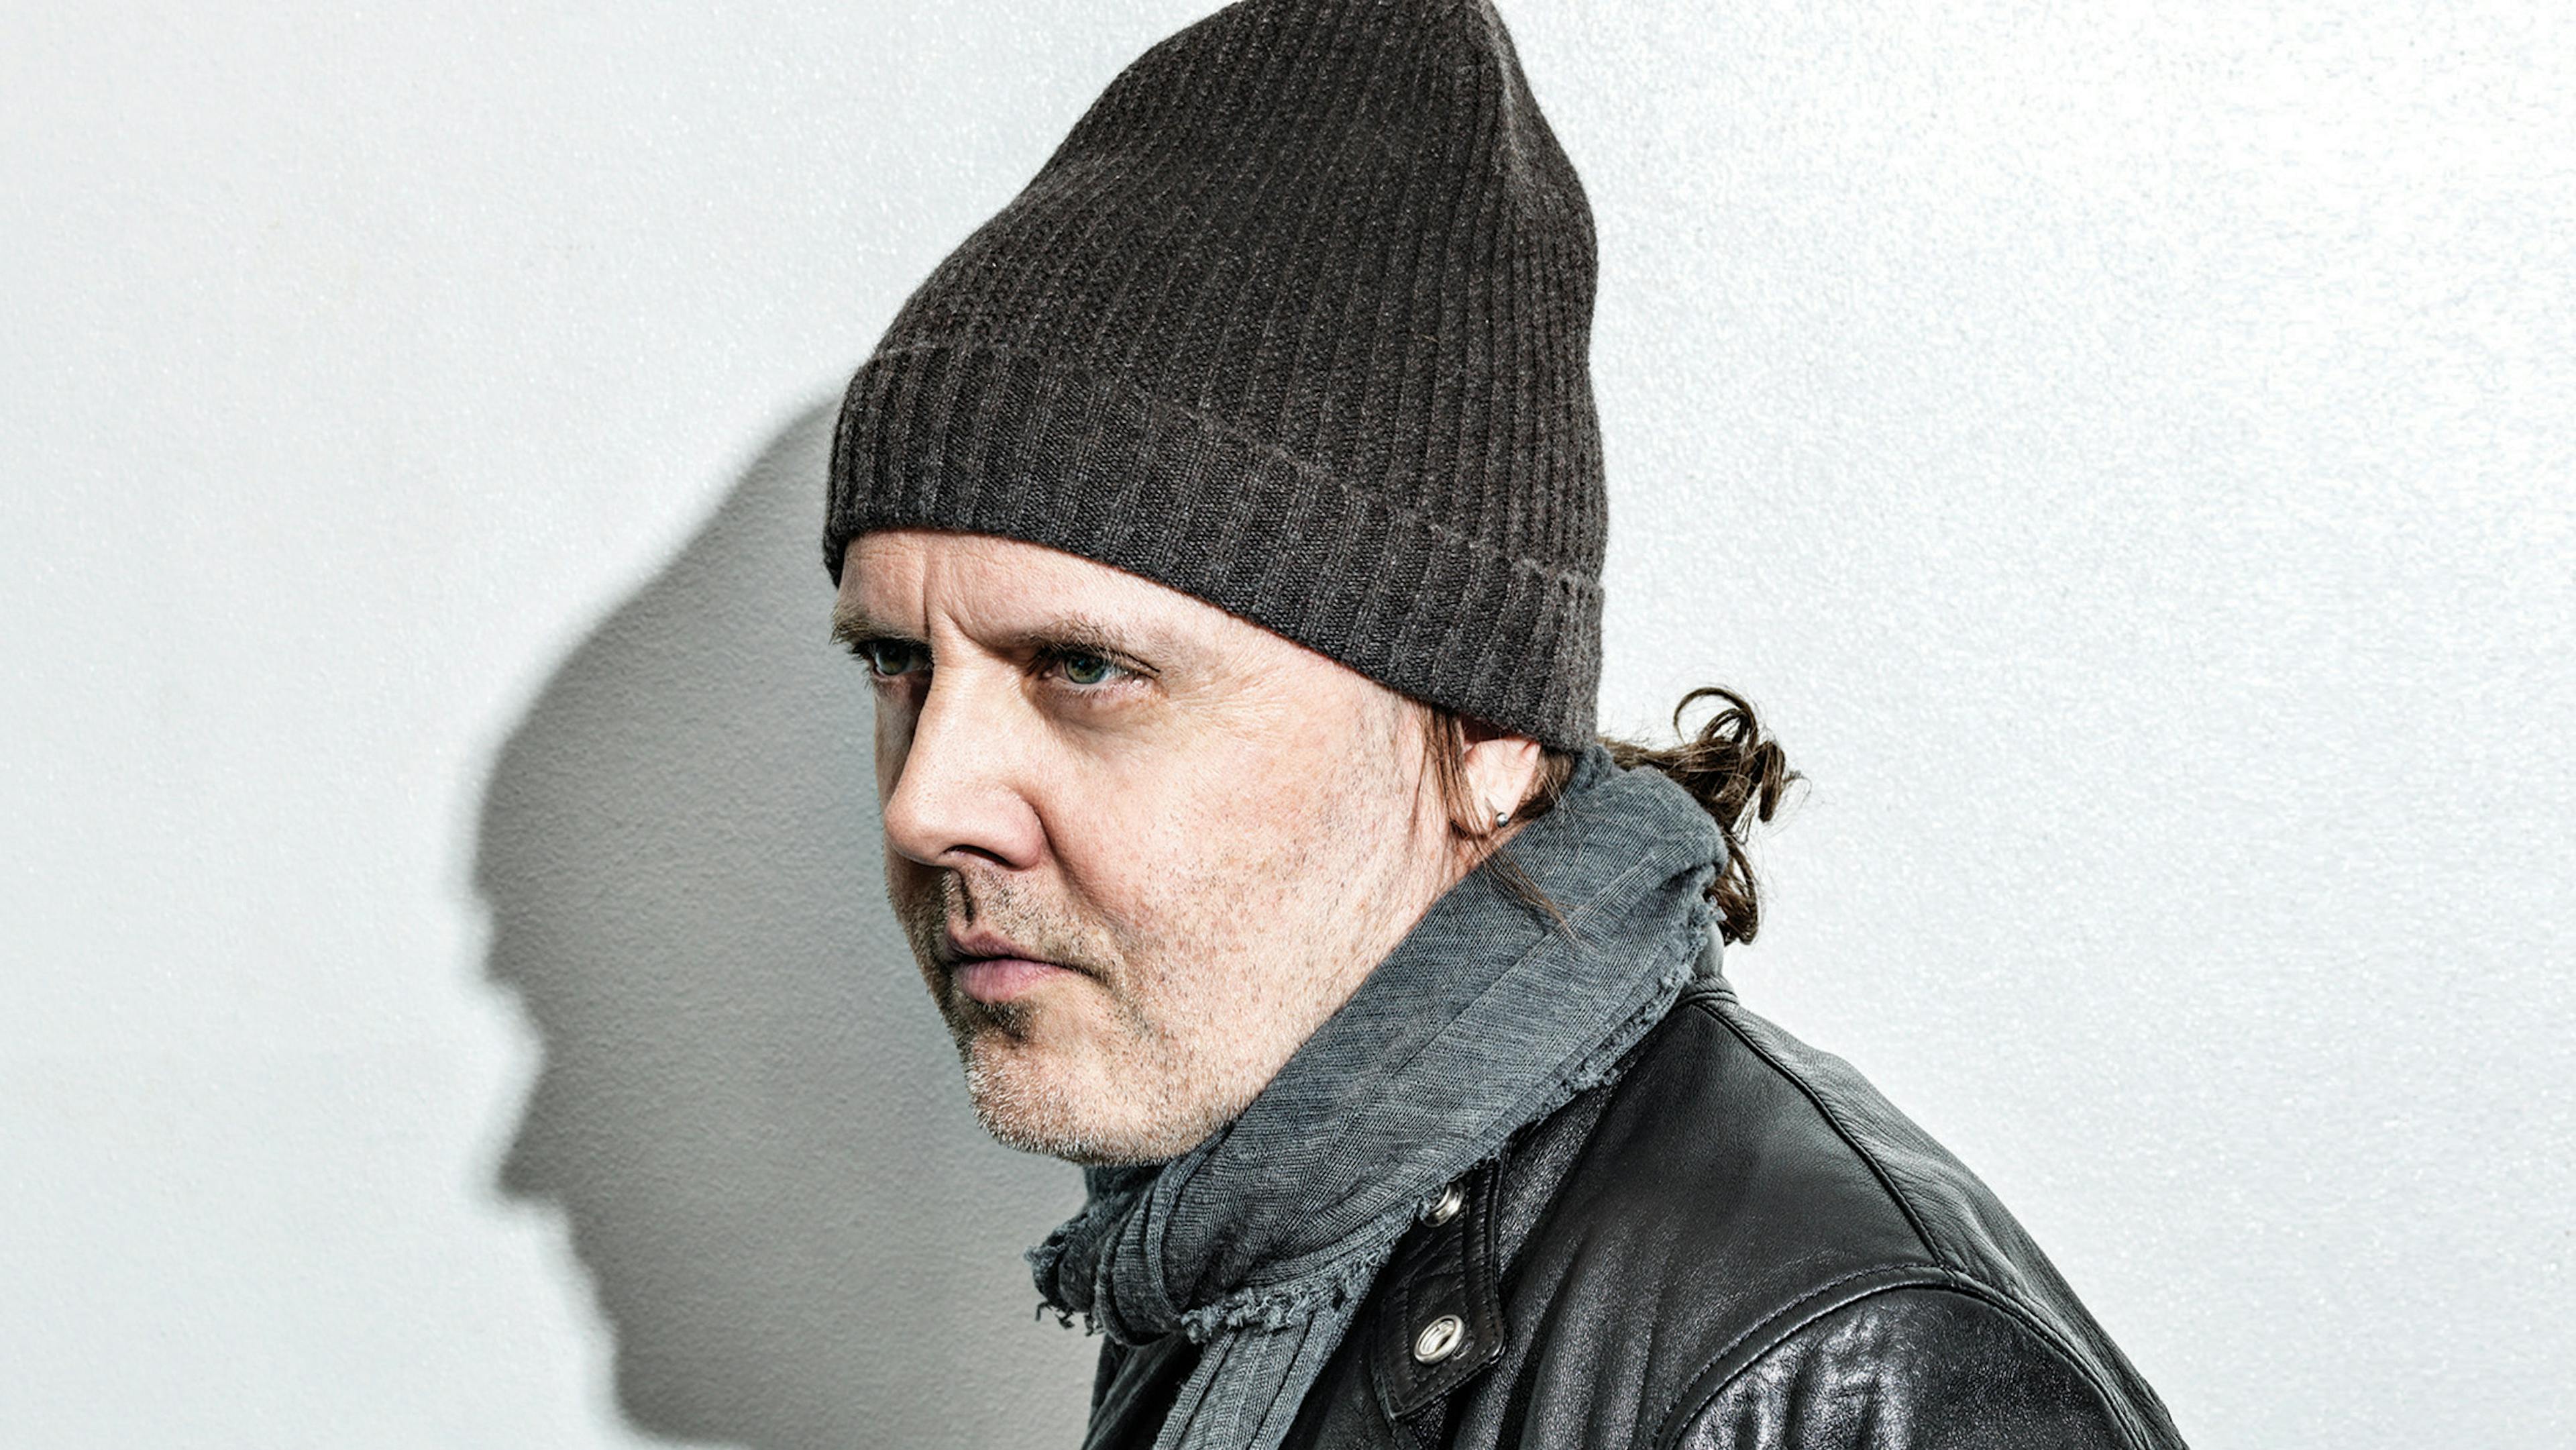 Metallica’s Lars Ulrich: “I still have a crazy thing about music. I’ve never lost the sense of being a fan”